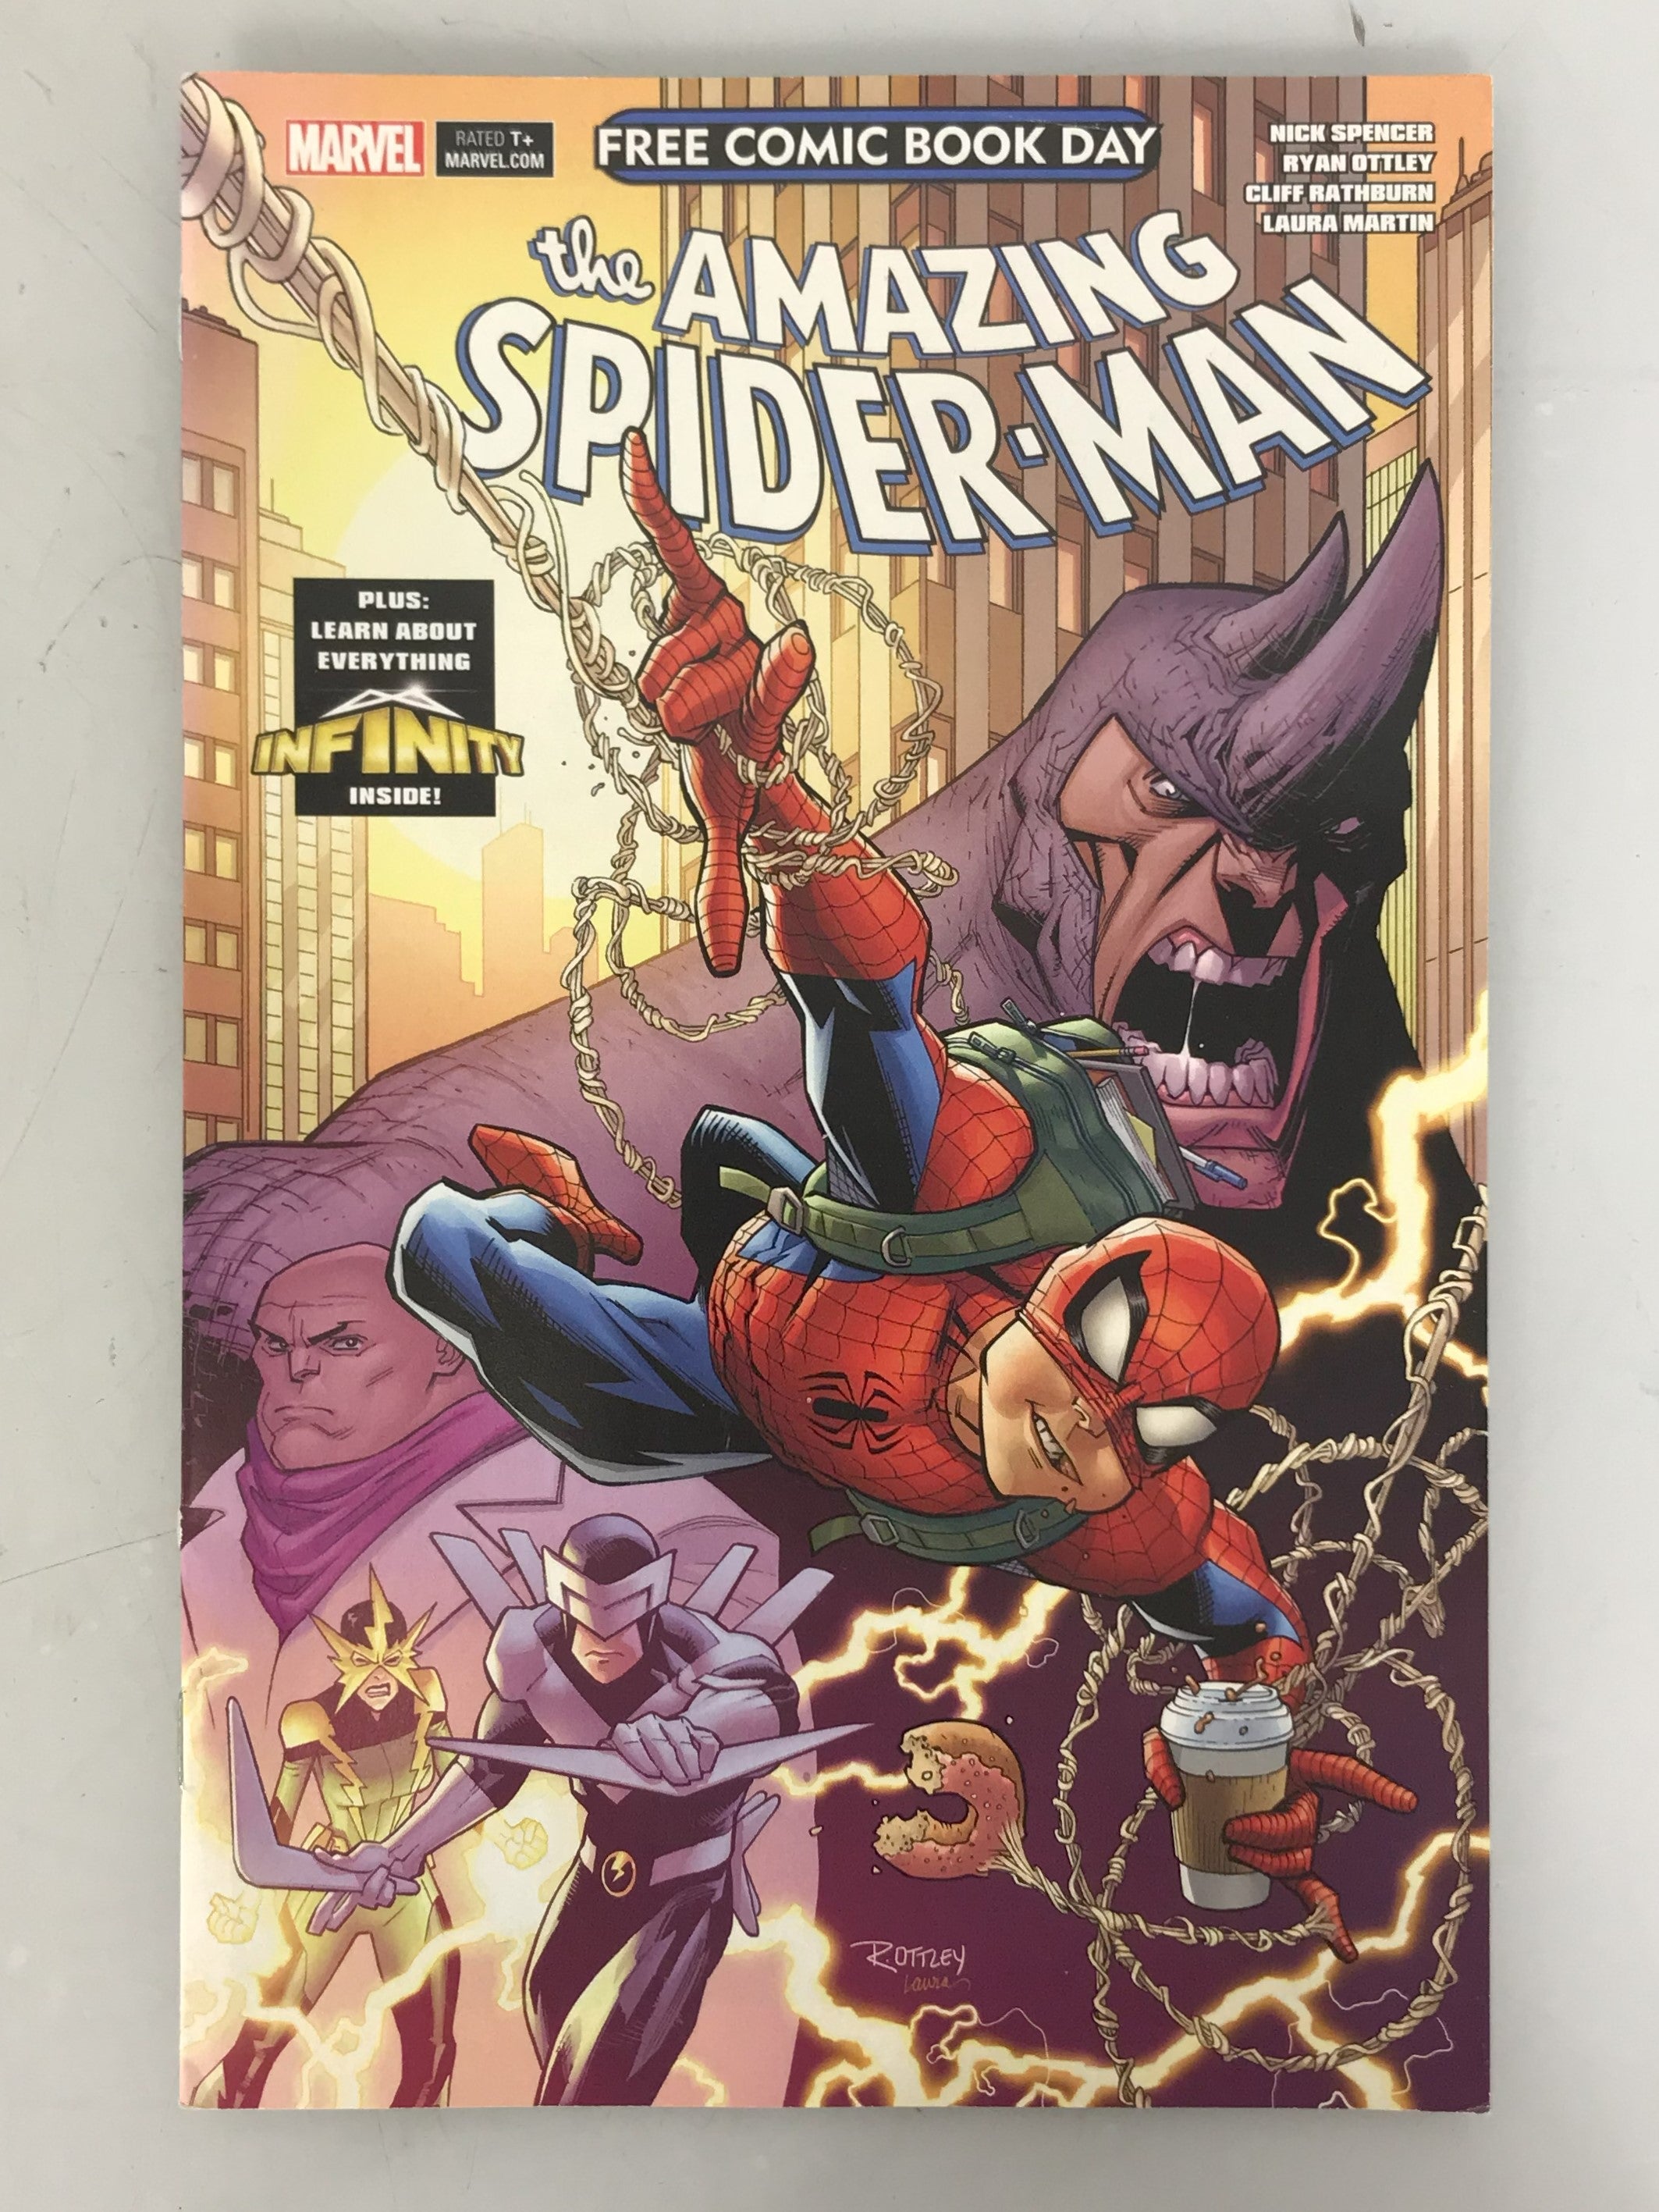 The Amazing Spider-Man Free Comic Book Day 2018